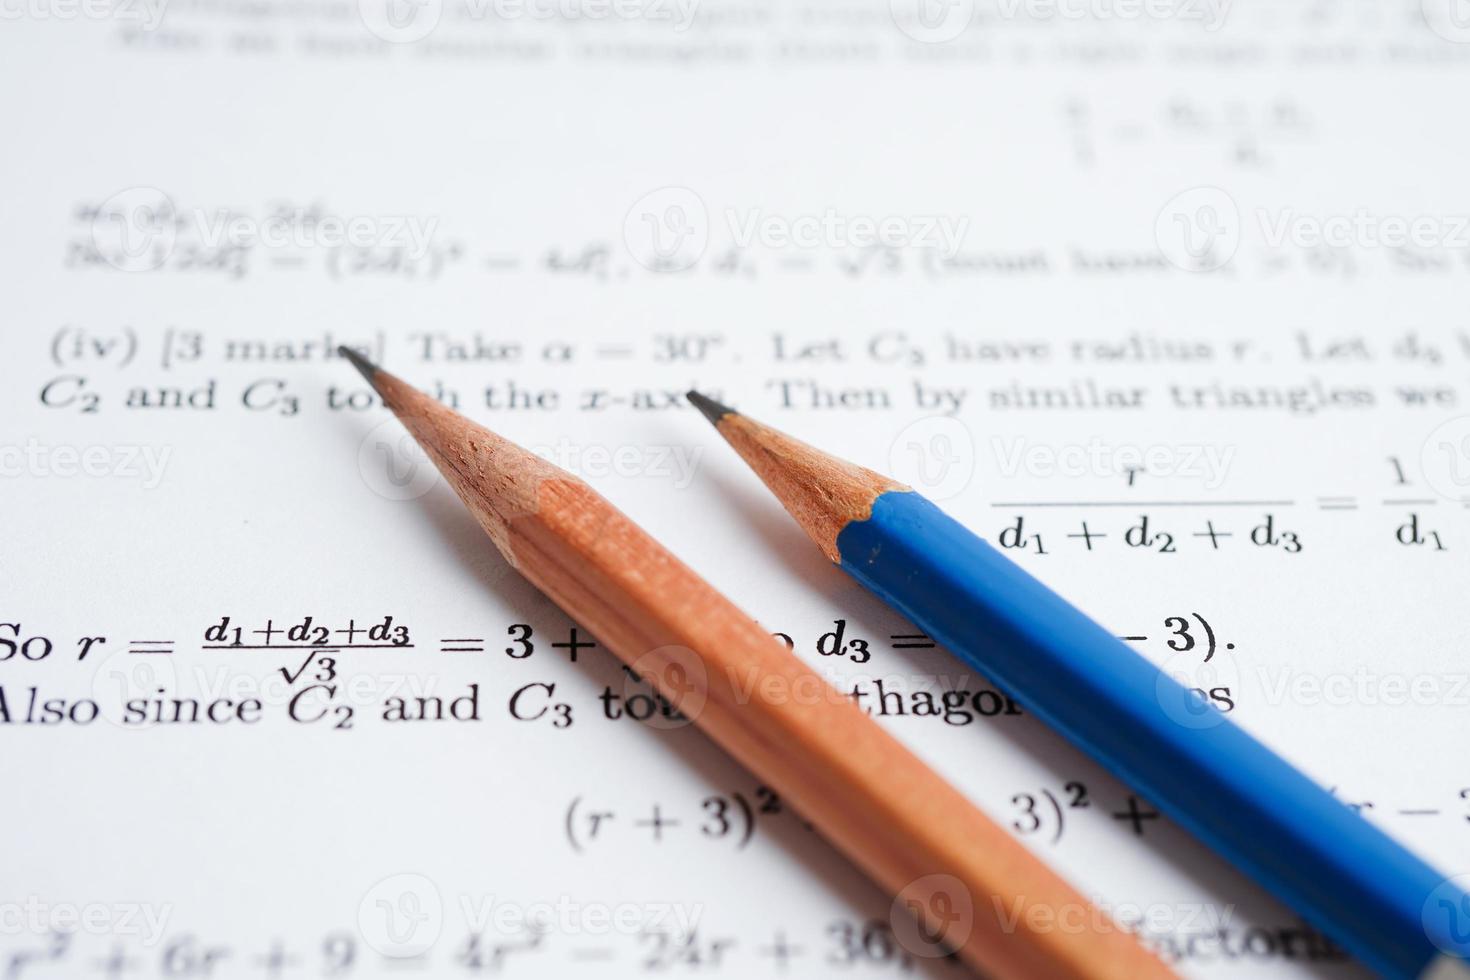 Pencil on mathematic formula exercise test paper in education school. photo